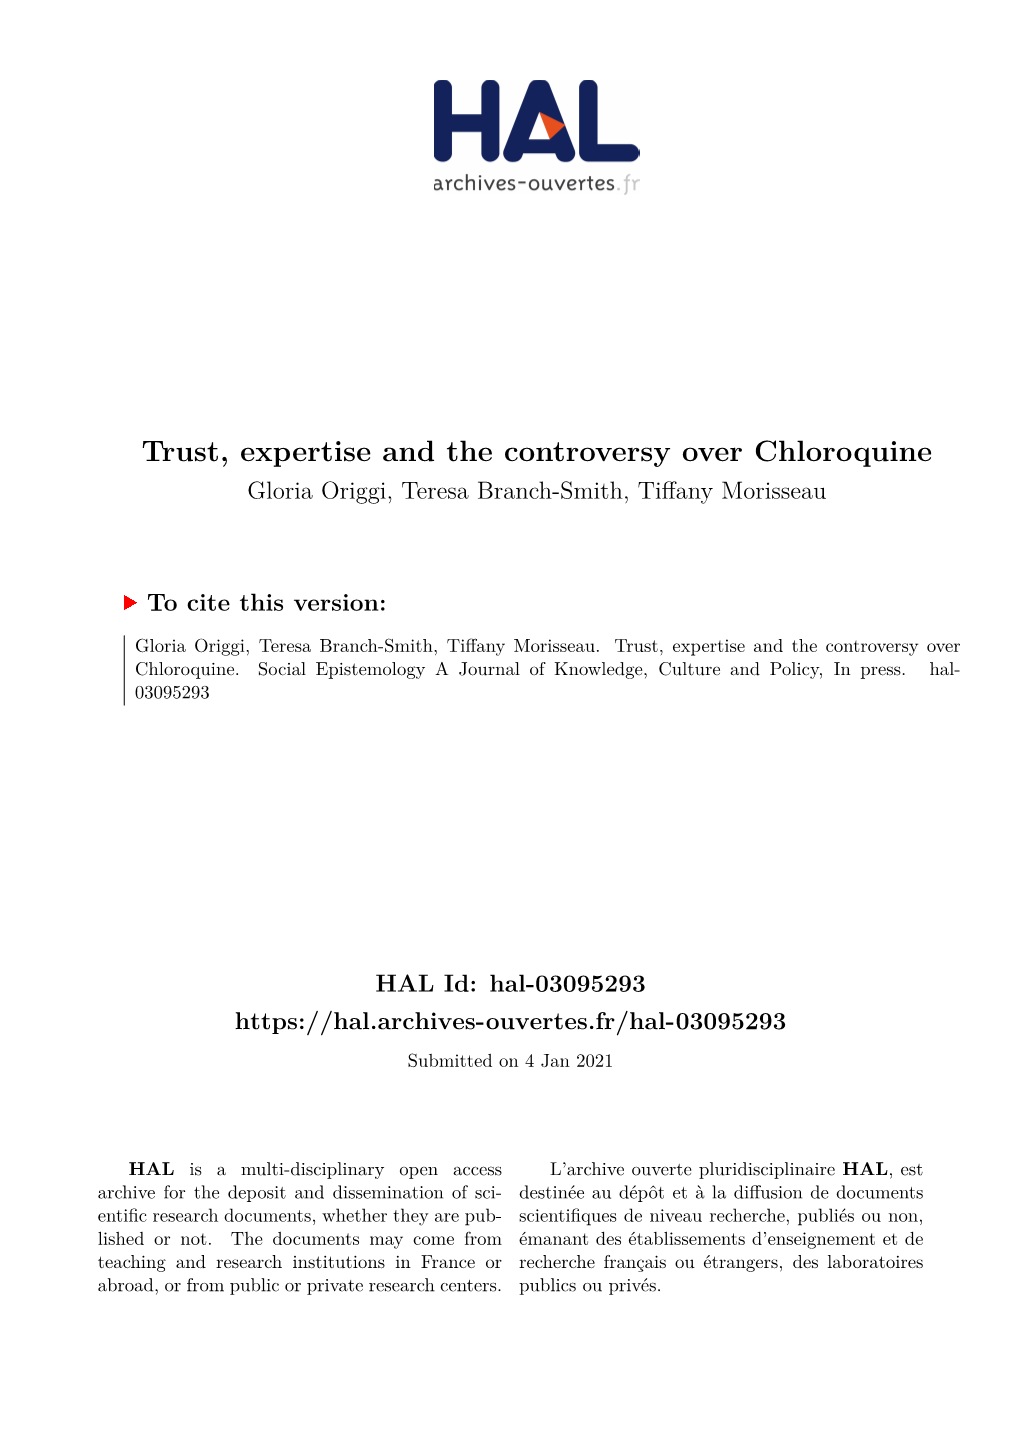 Trust, Expertise and the Controversy Over Chloroquine Gloria Origgi, Teresa Branch-Smith, Tiffany Morisseau